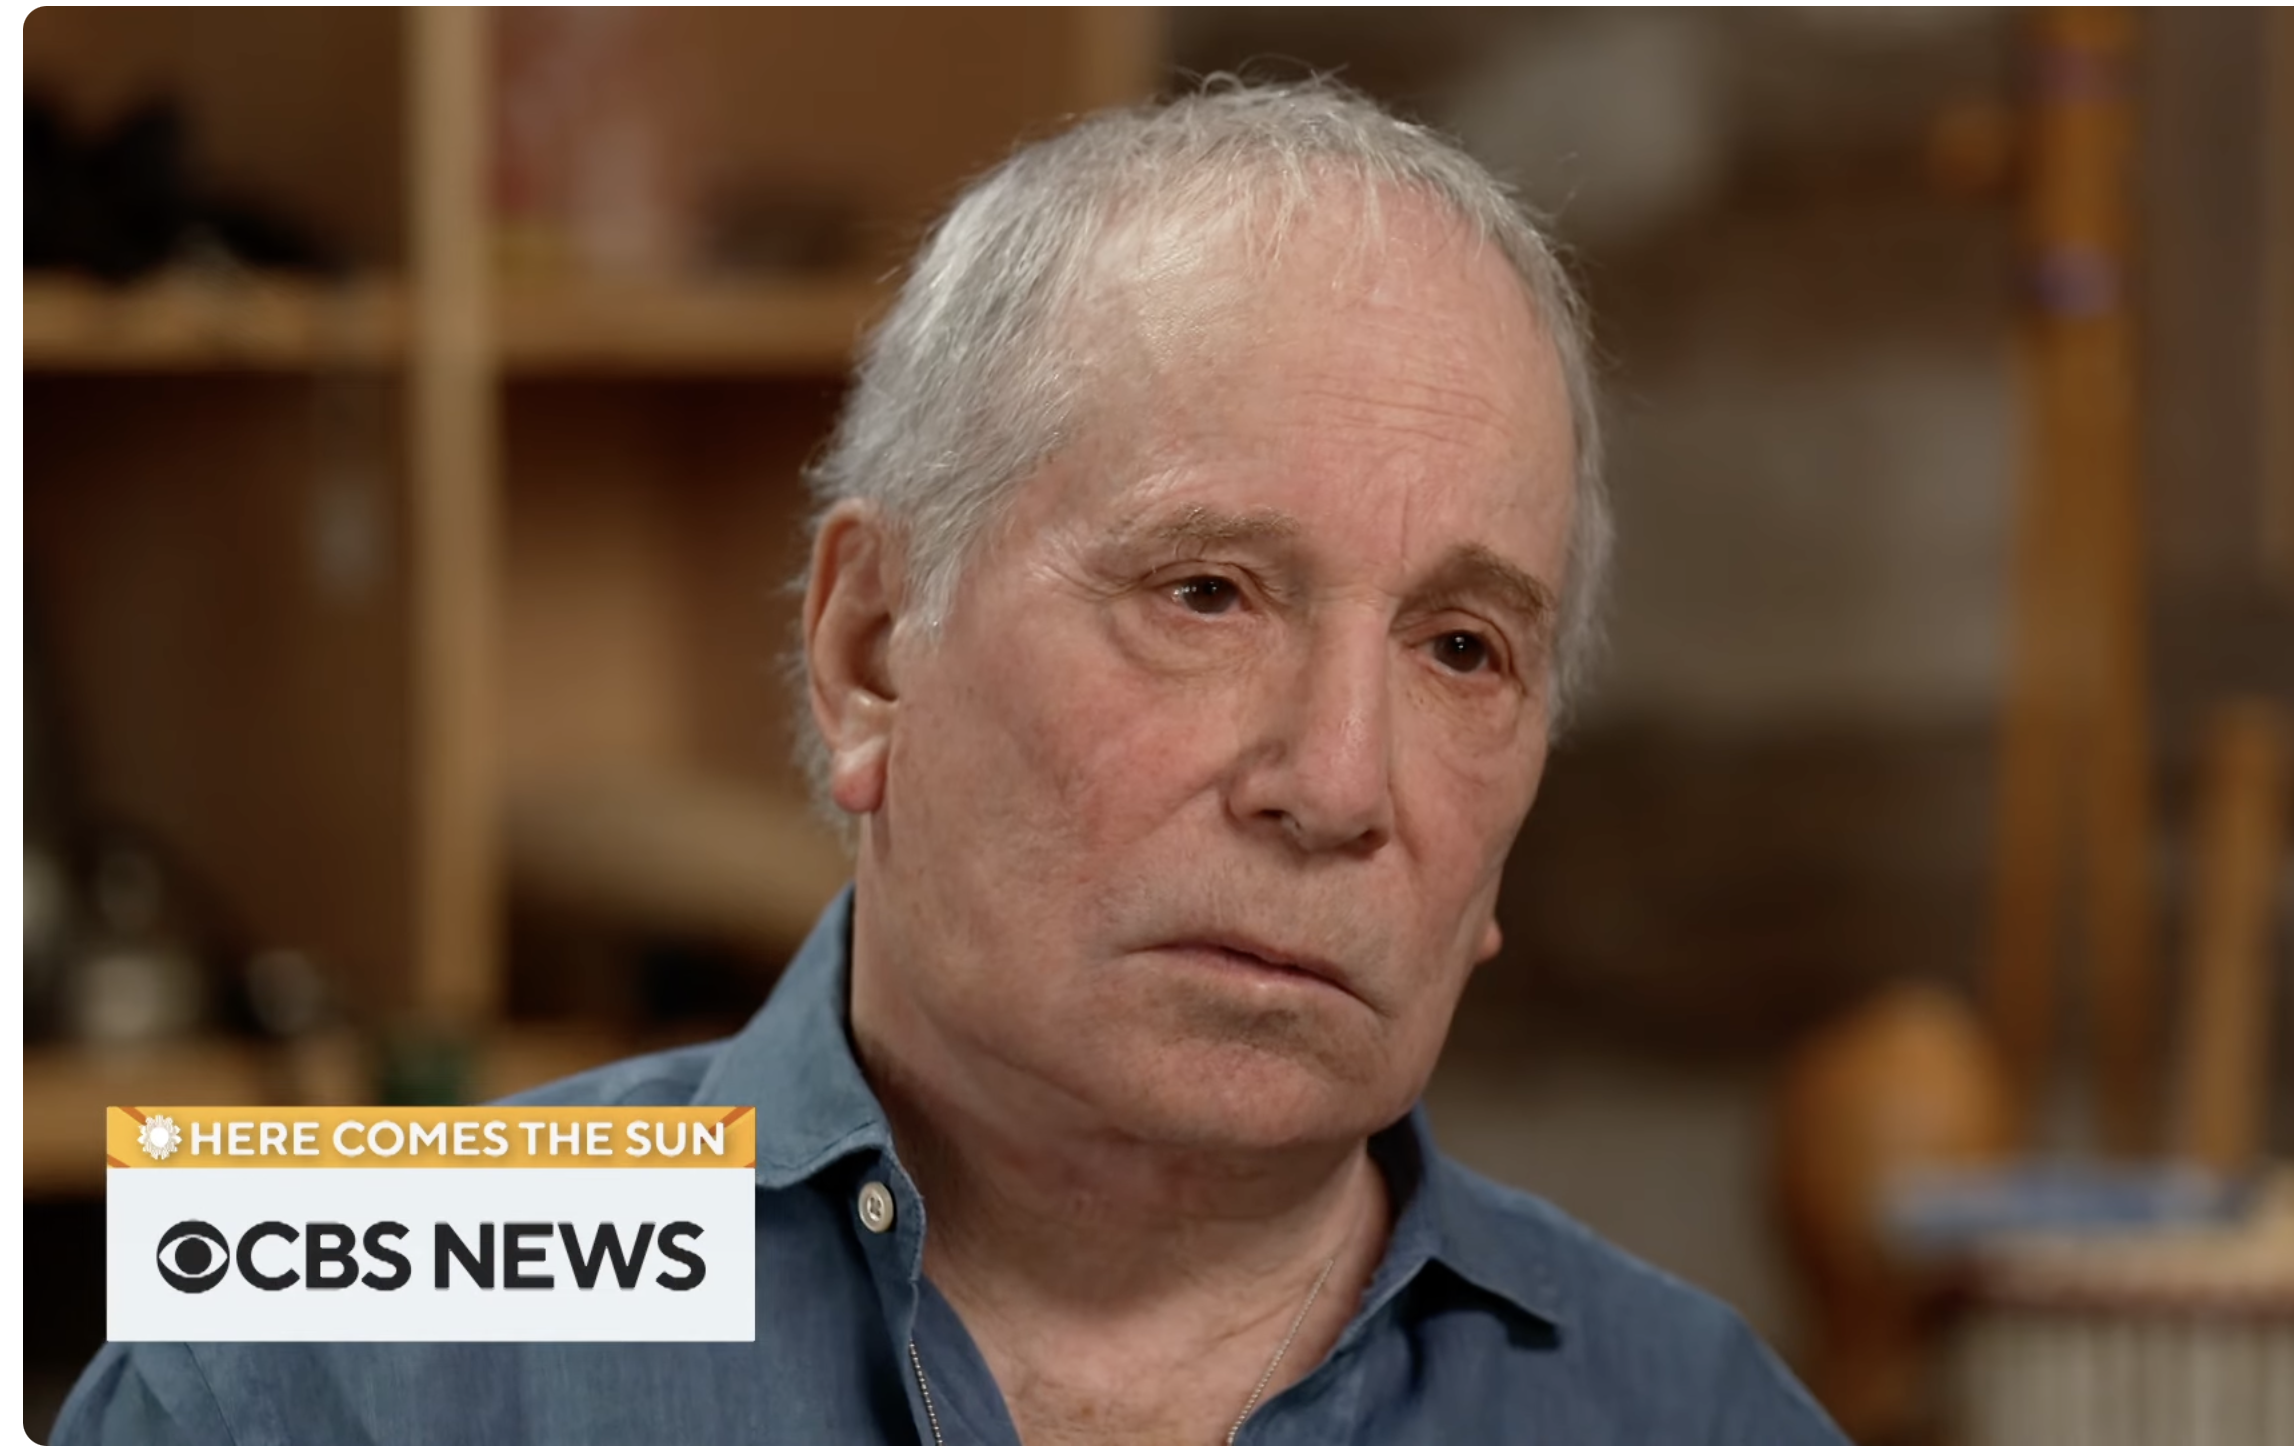 Picture of Paul Simon with gray hair and a drooping affect.